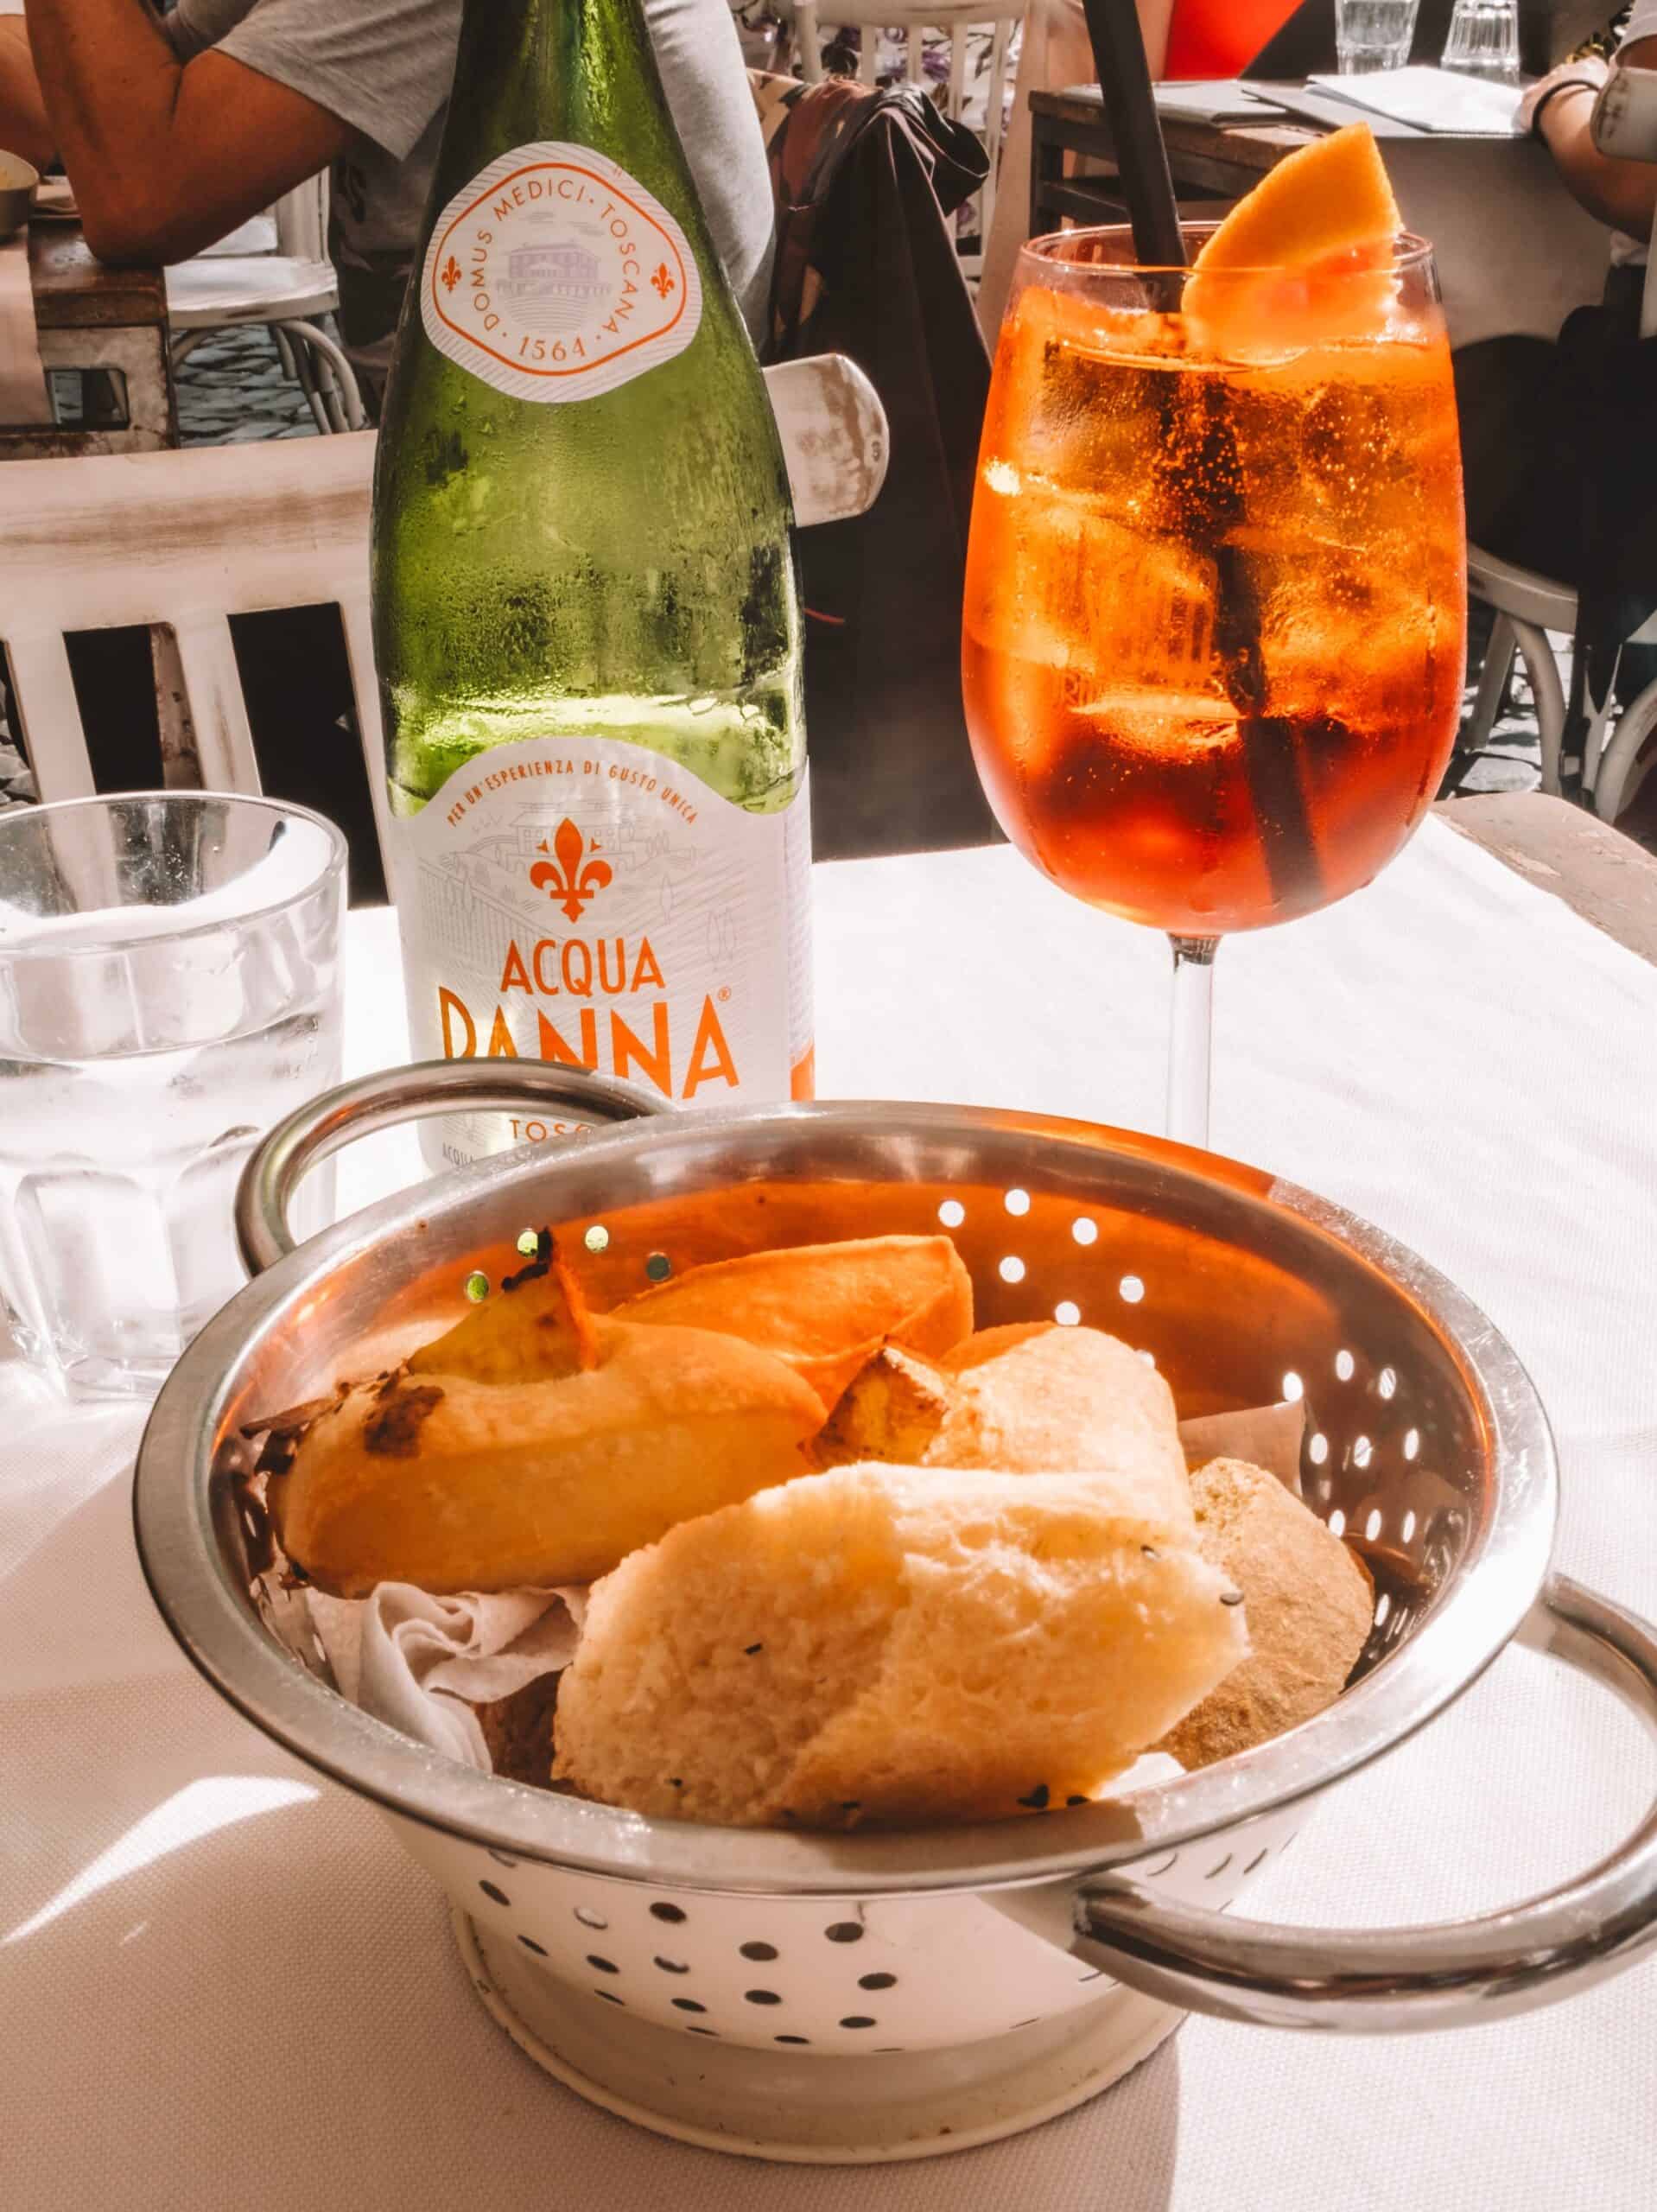 An Aperol Spritz and a basket of homemade bread from Ristorante La Scala in Trastevere. 